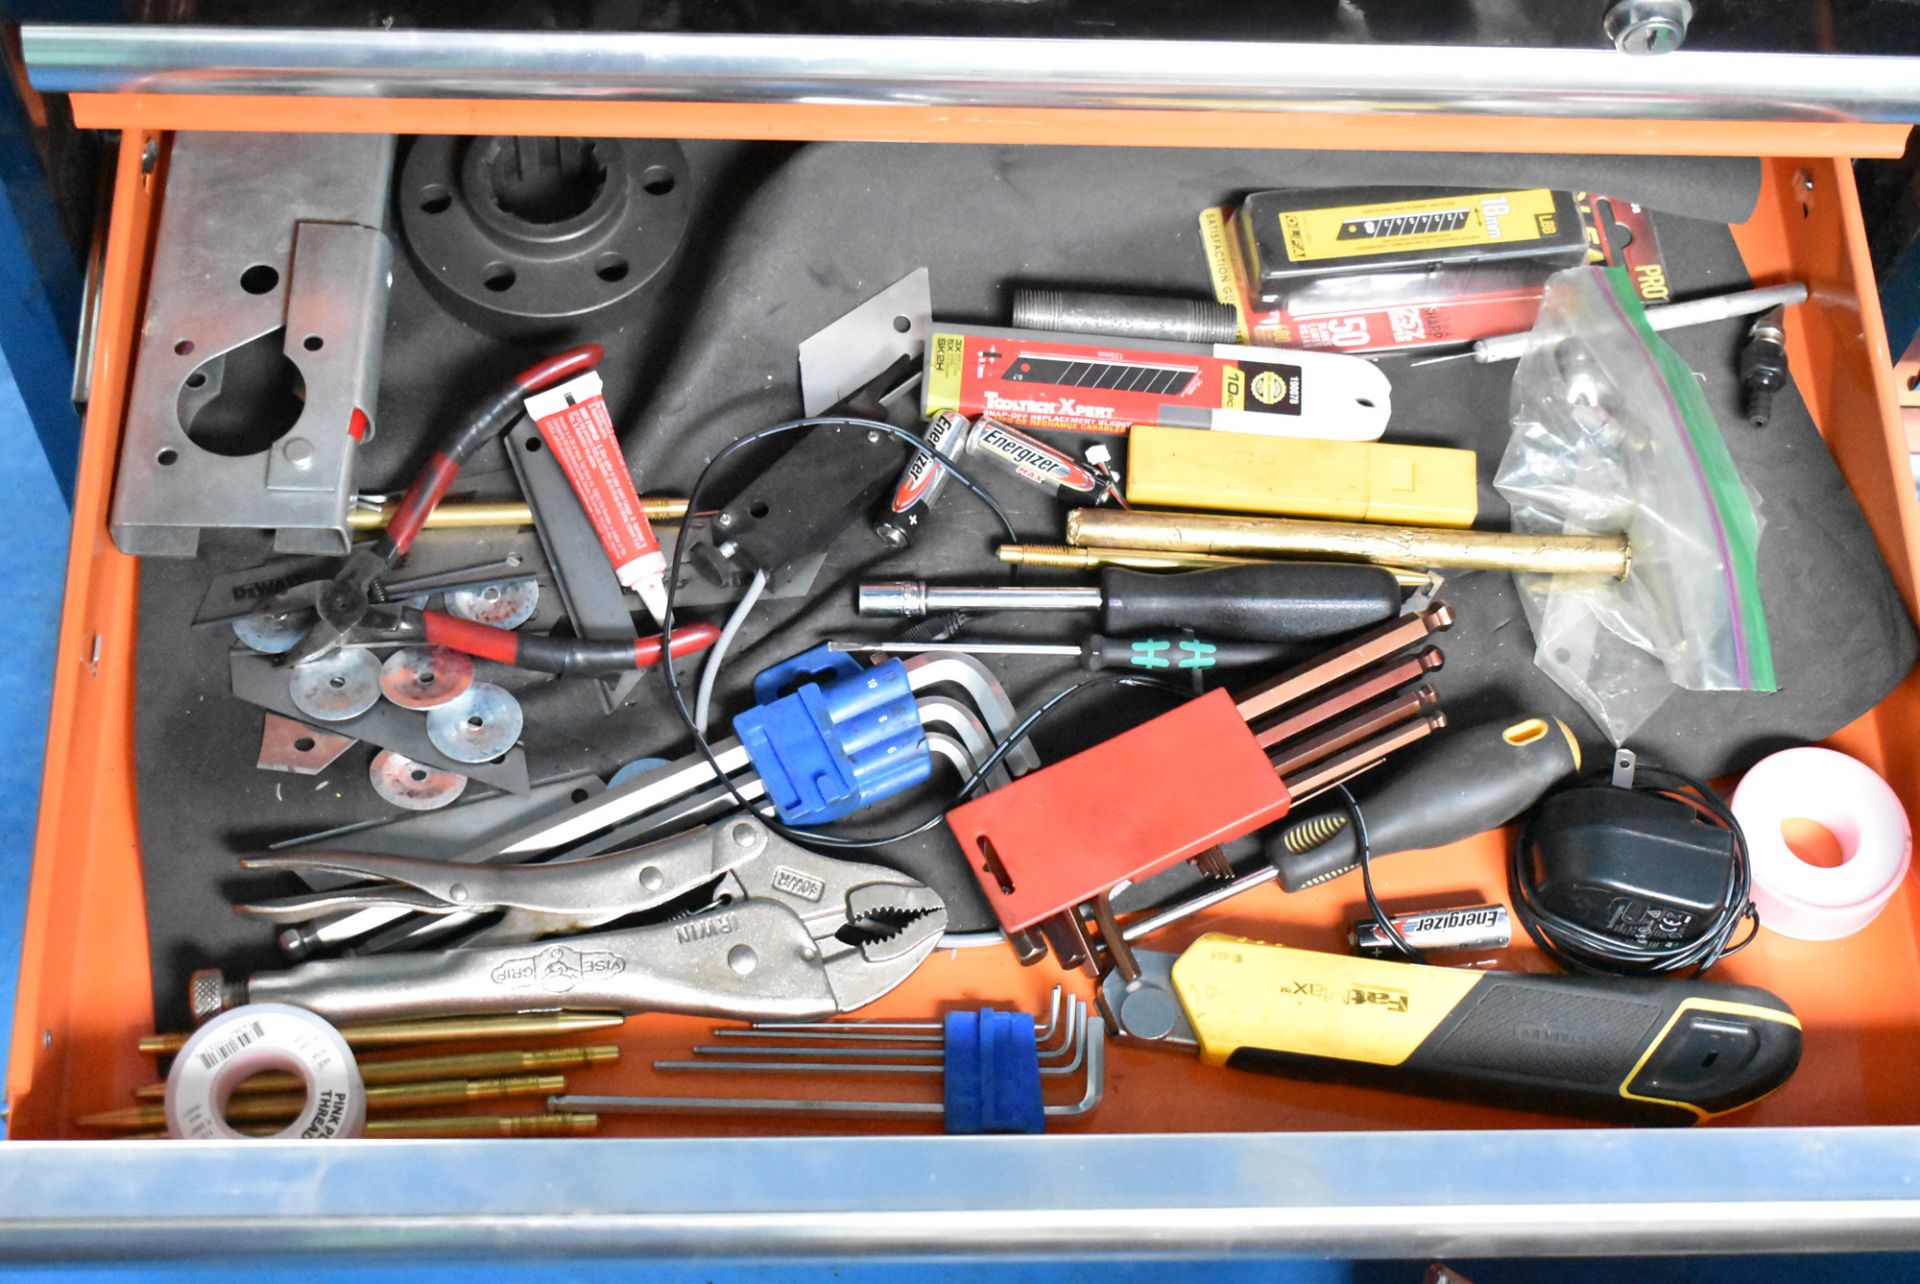 LOT/ DYNAMIC 8-DRAWER TOOL CHEST WITH LIEN FA INJECTION MOLDER SPARE PARTS & TOOLS - Image 3 of 3